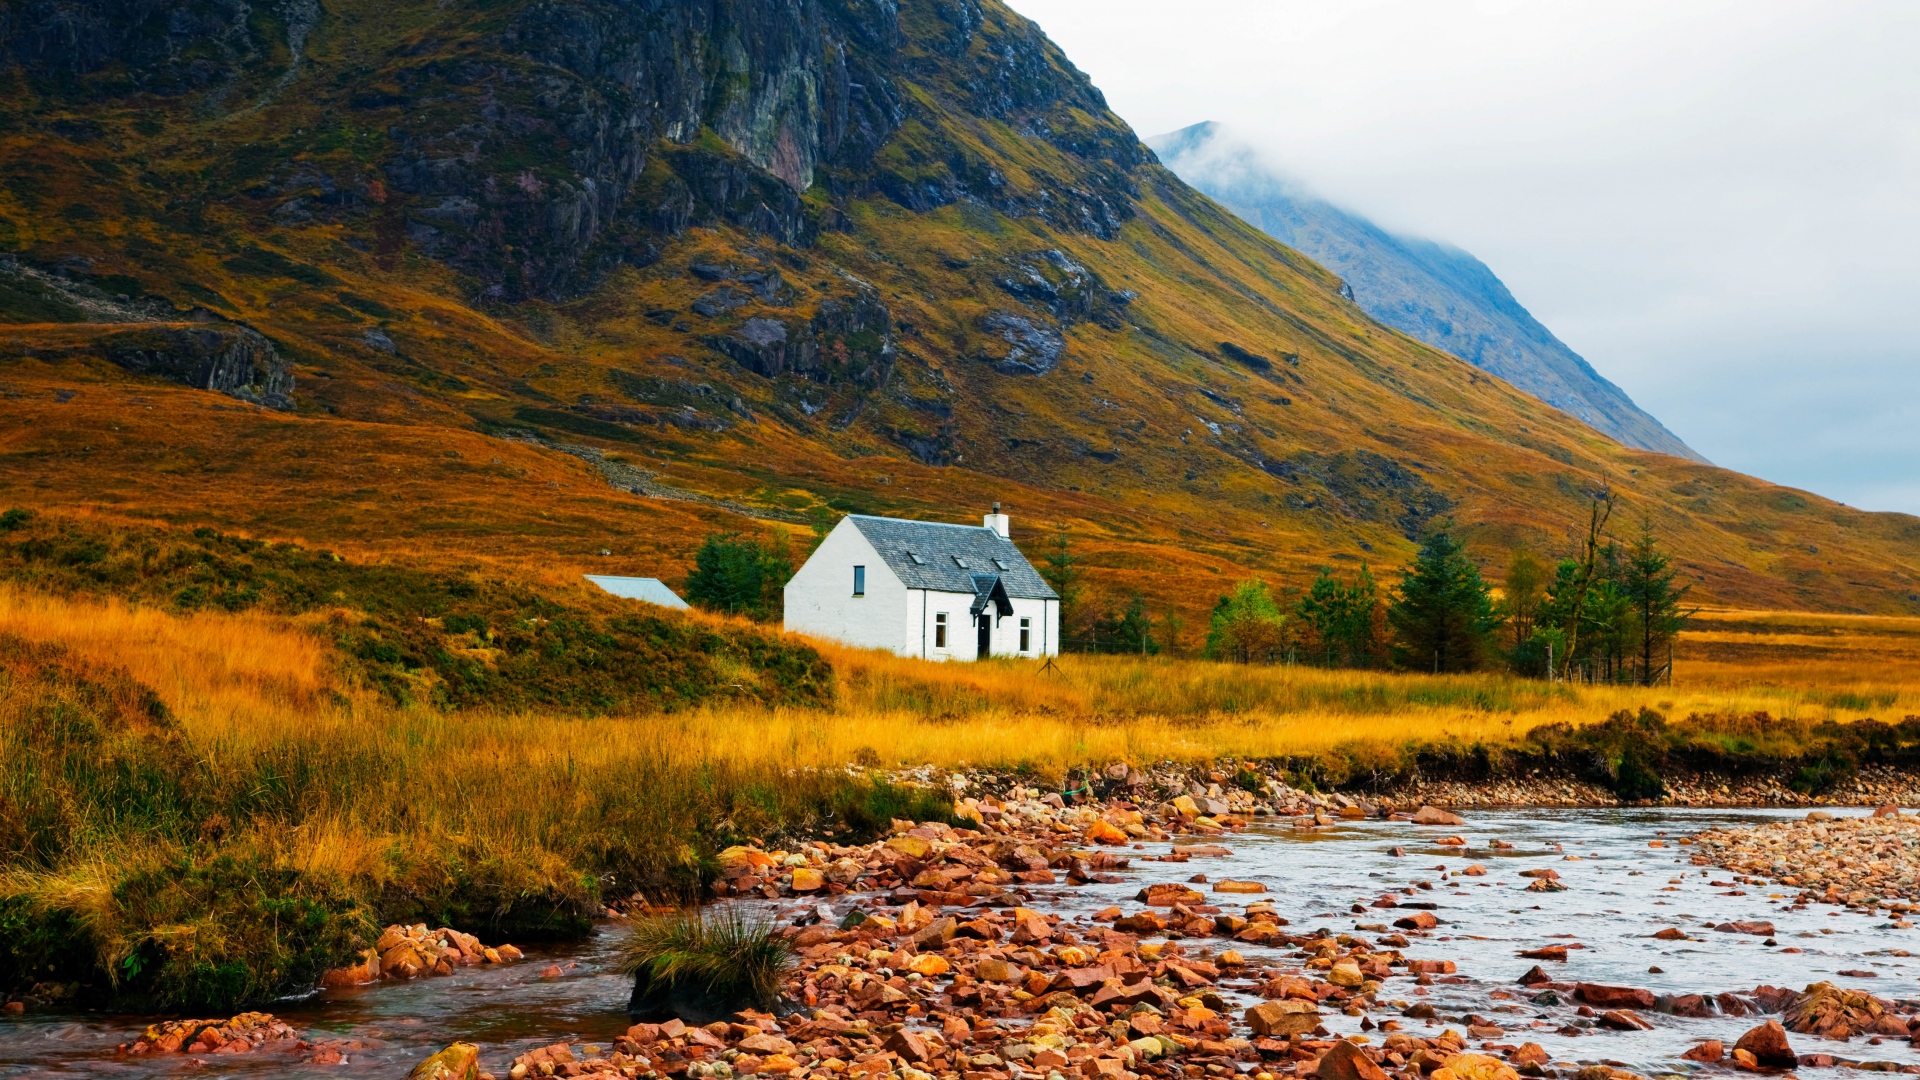 Download 1920x1080 HD Wallpapers building mountain river scotland